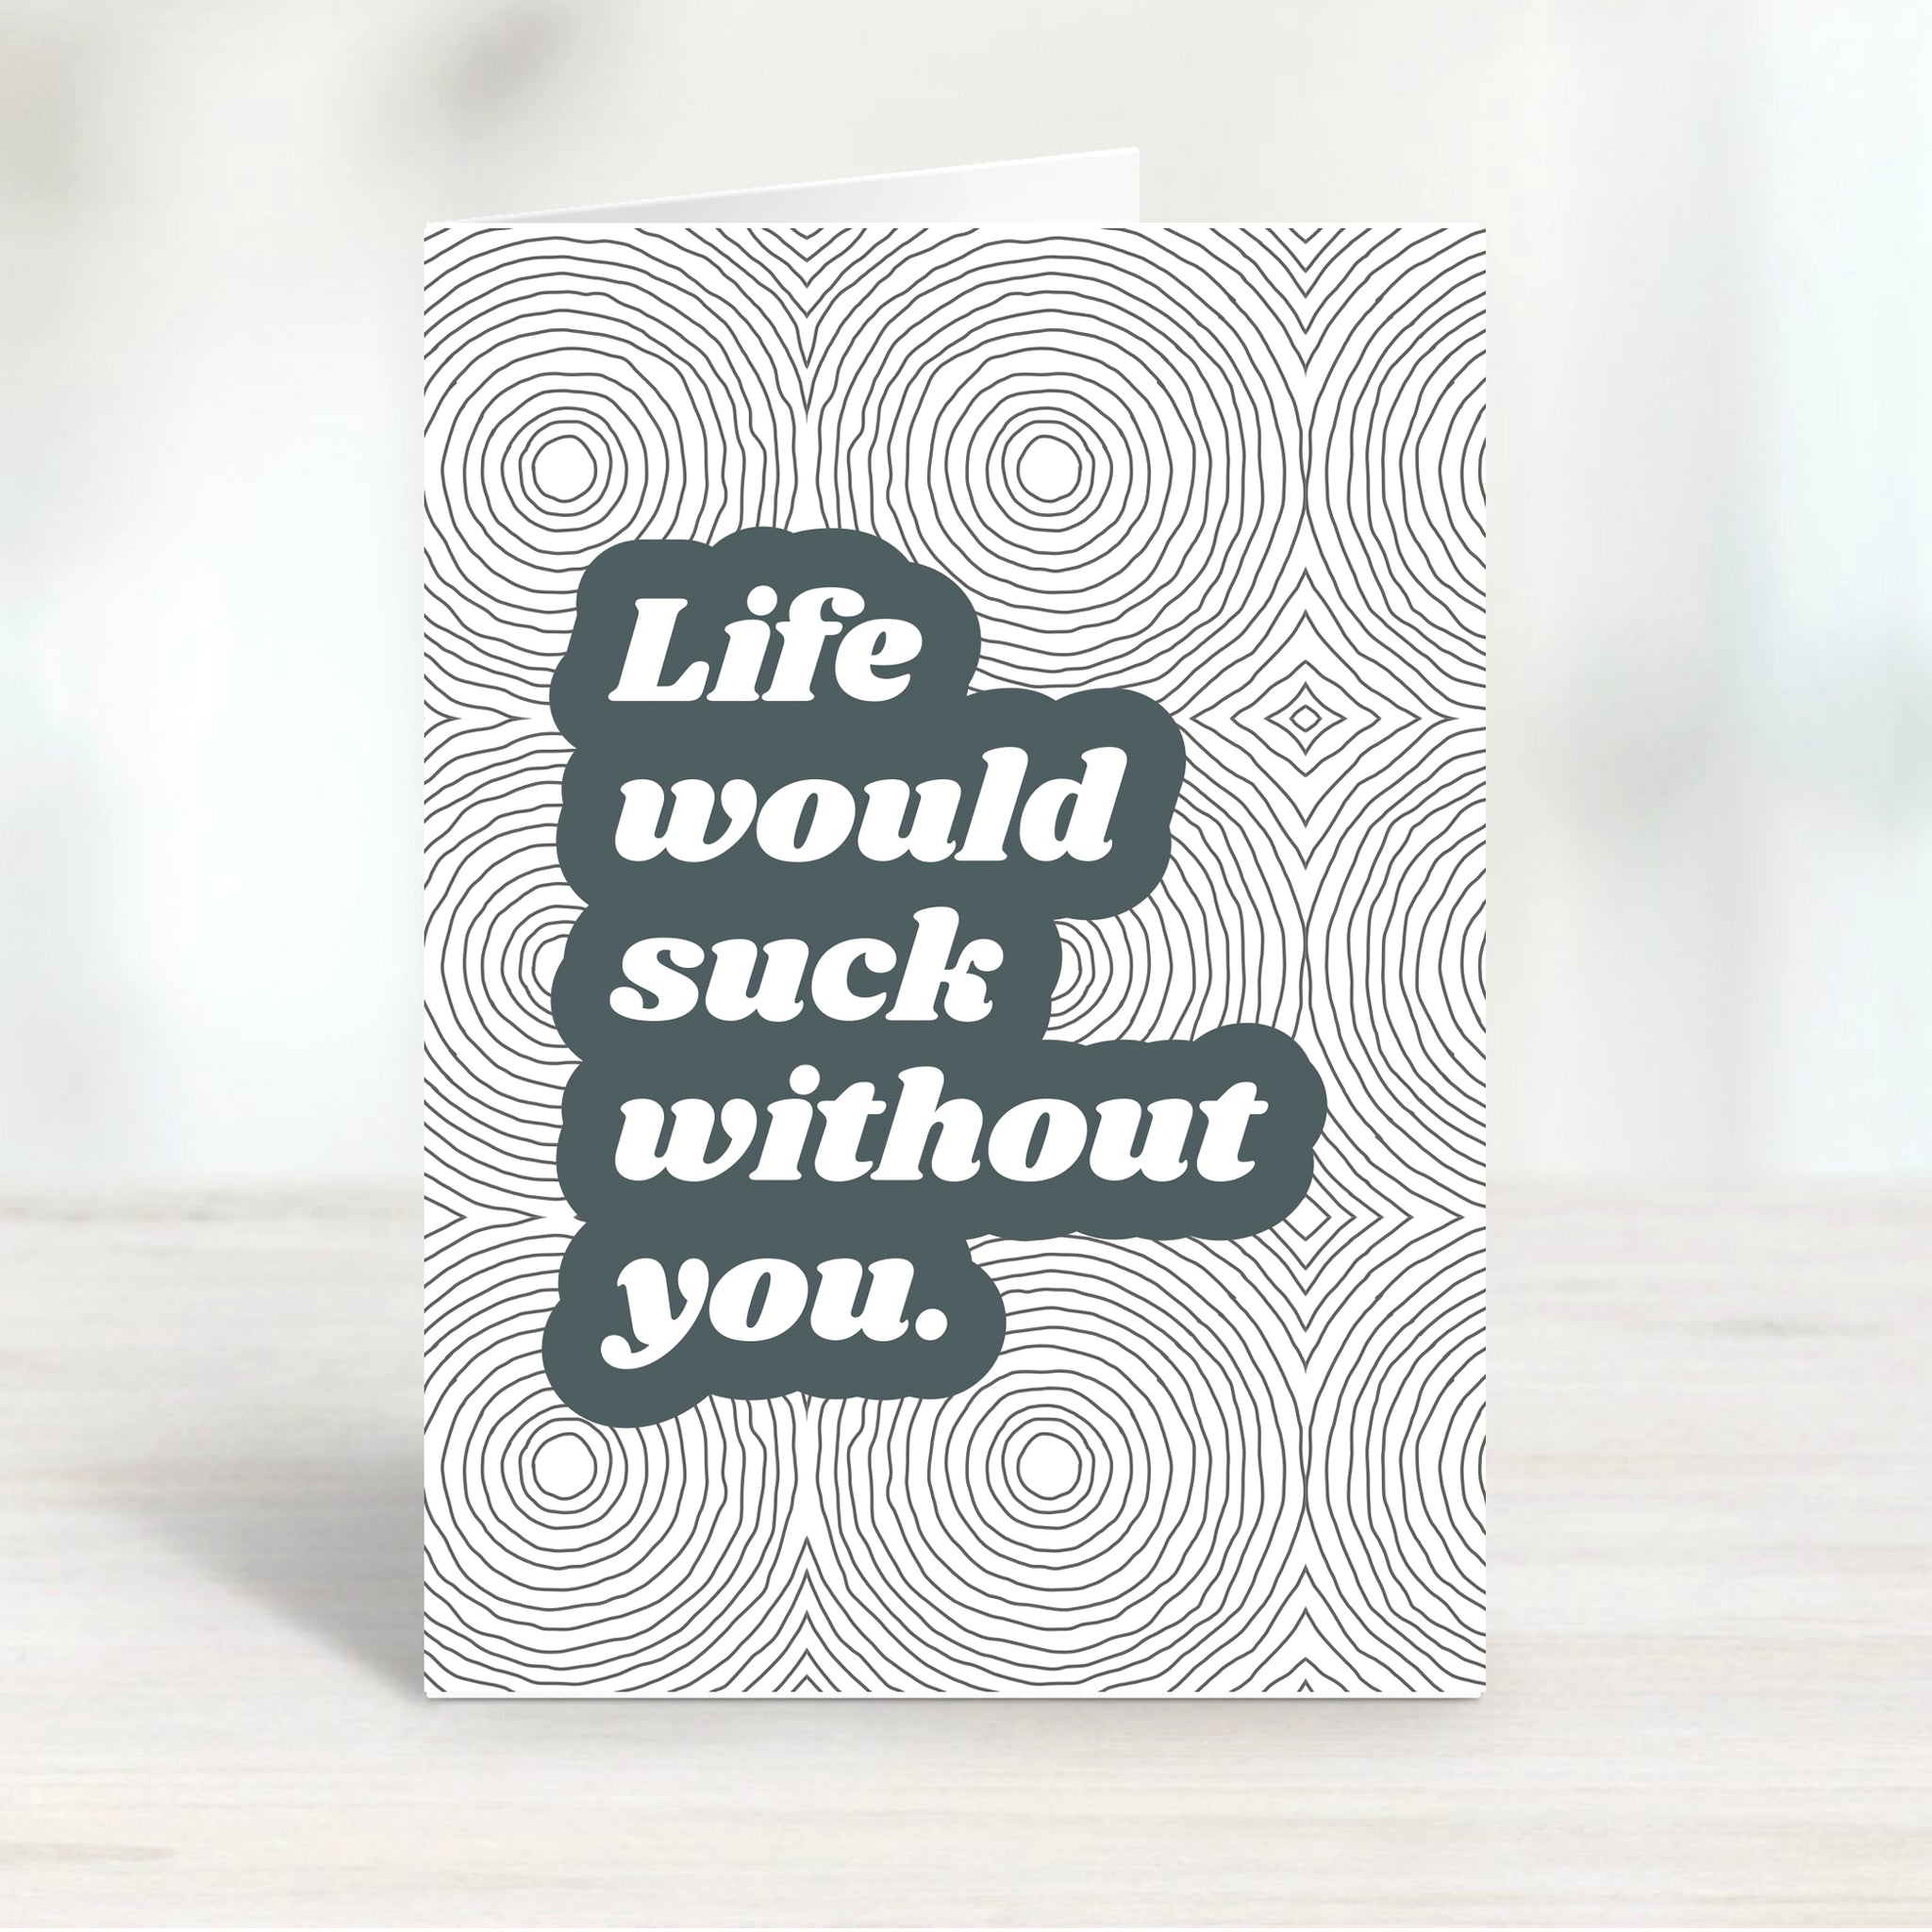 Life Would Suck Card